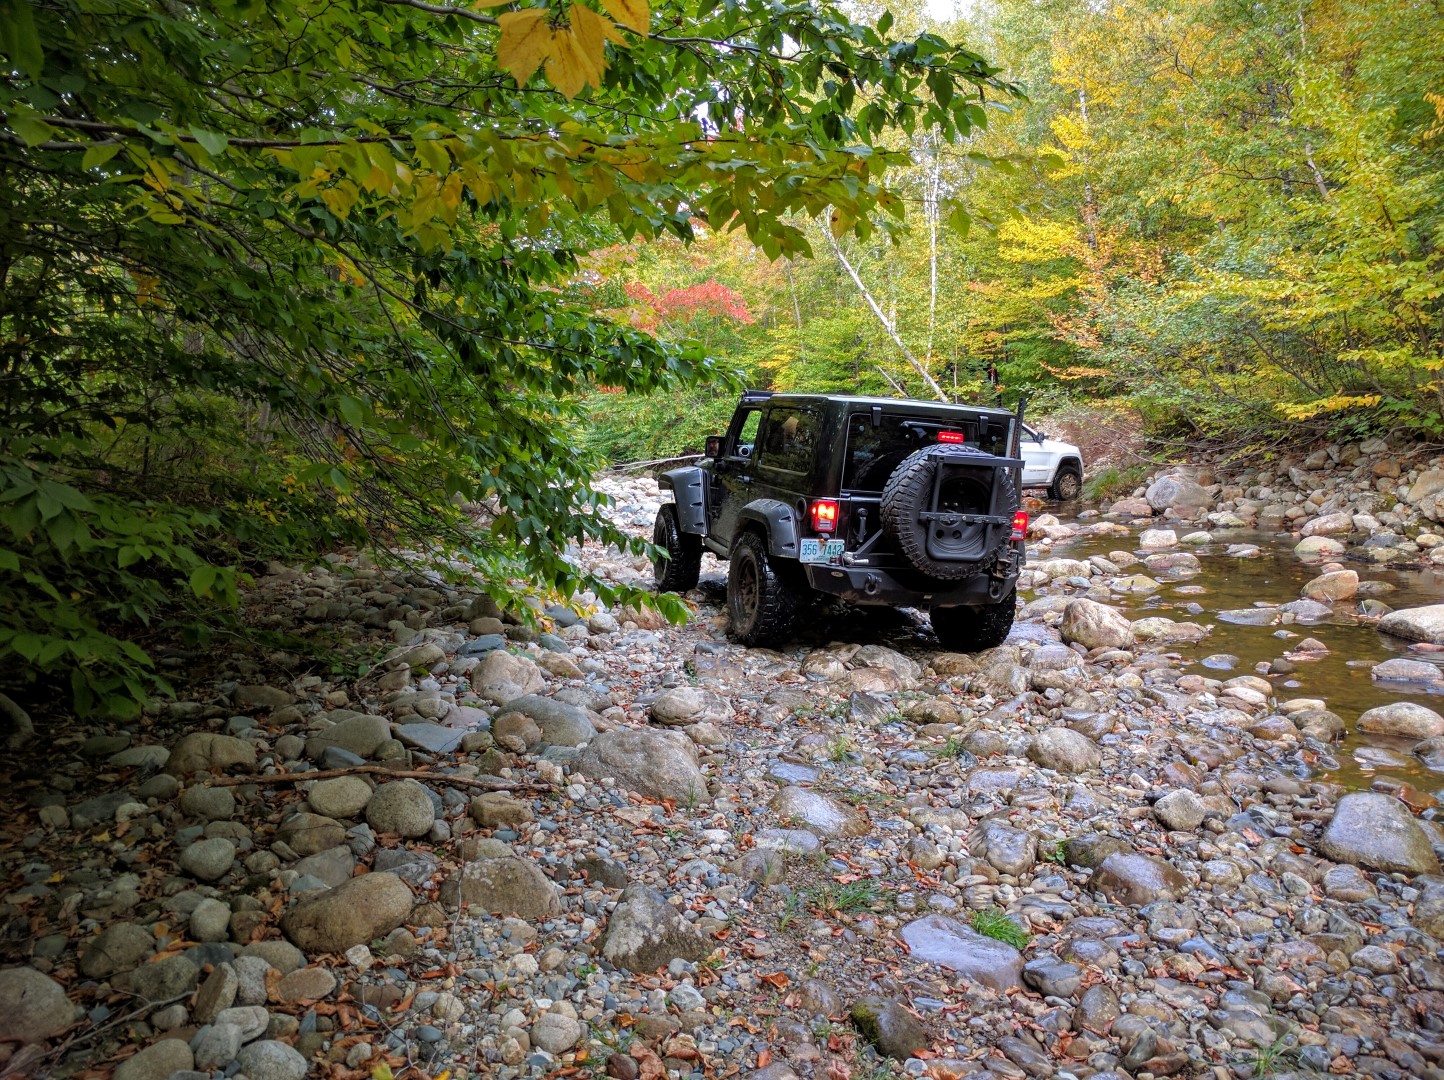 Driving through the creek bed